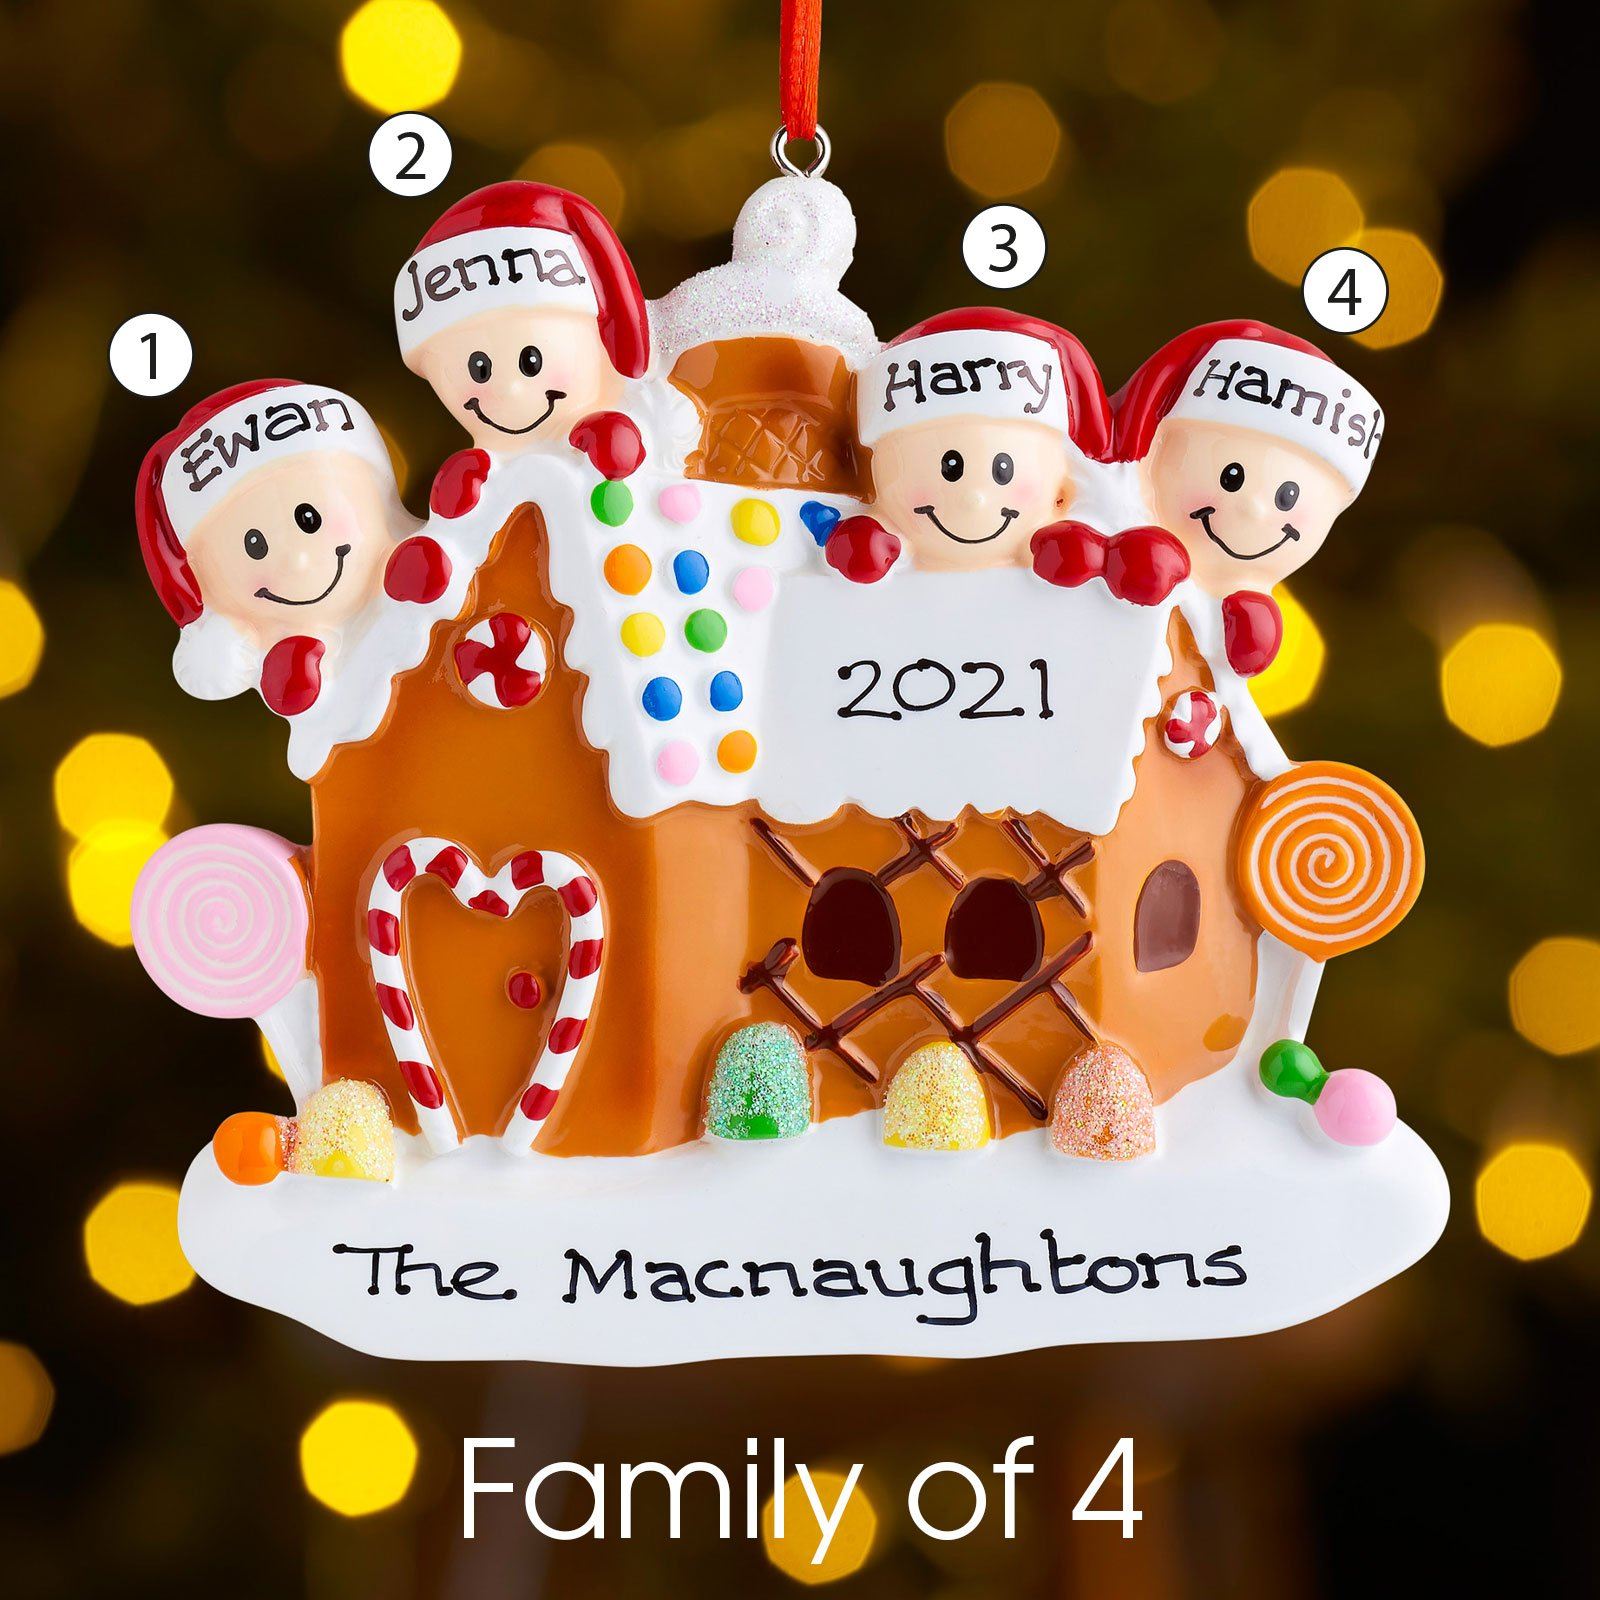 Christmas Ornament - Personalised Family Christmas Xmas Tree Decoration Ornament - Gingerbread House Family